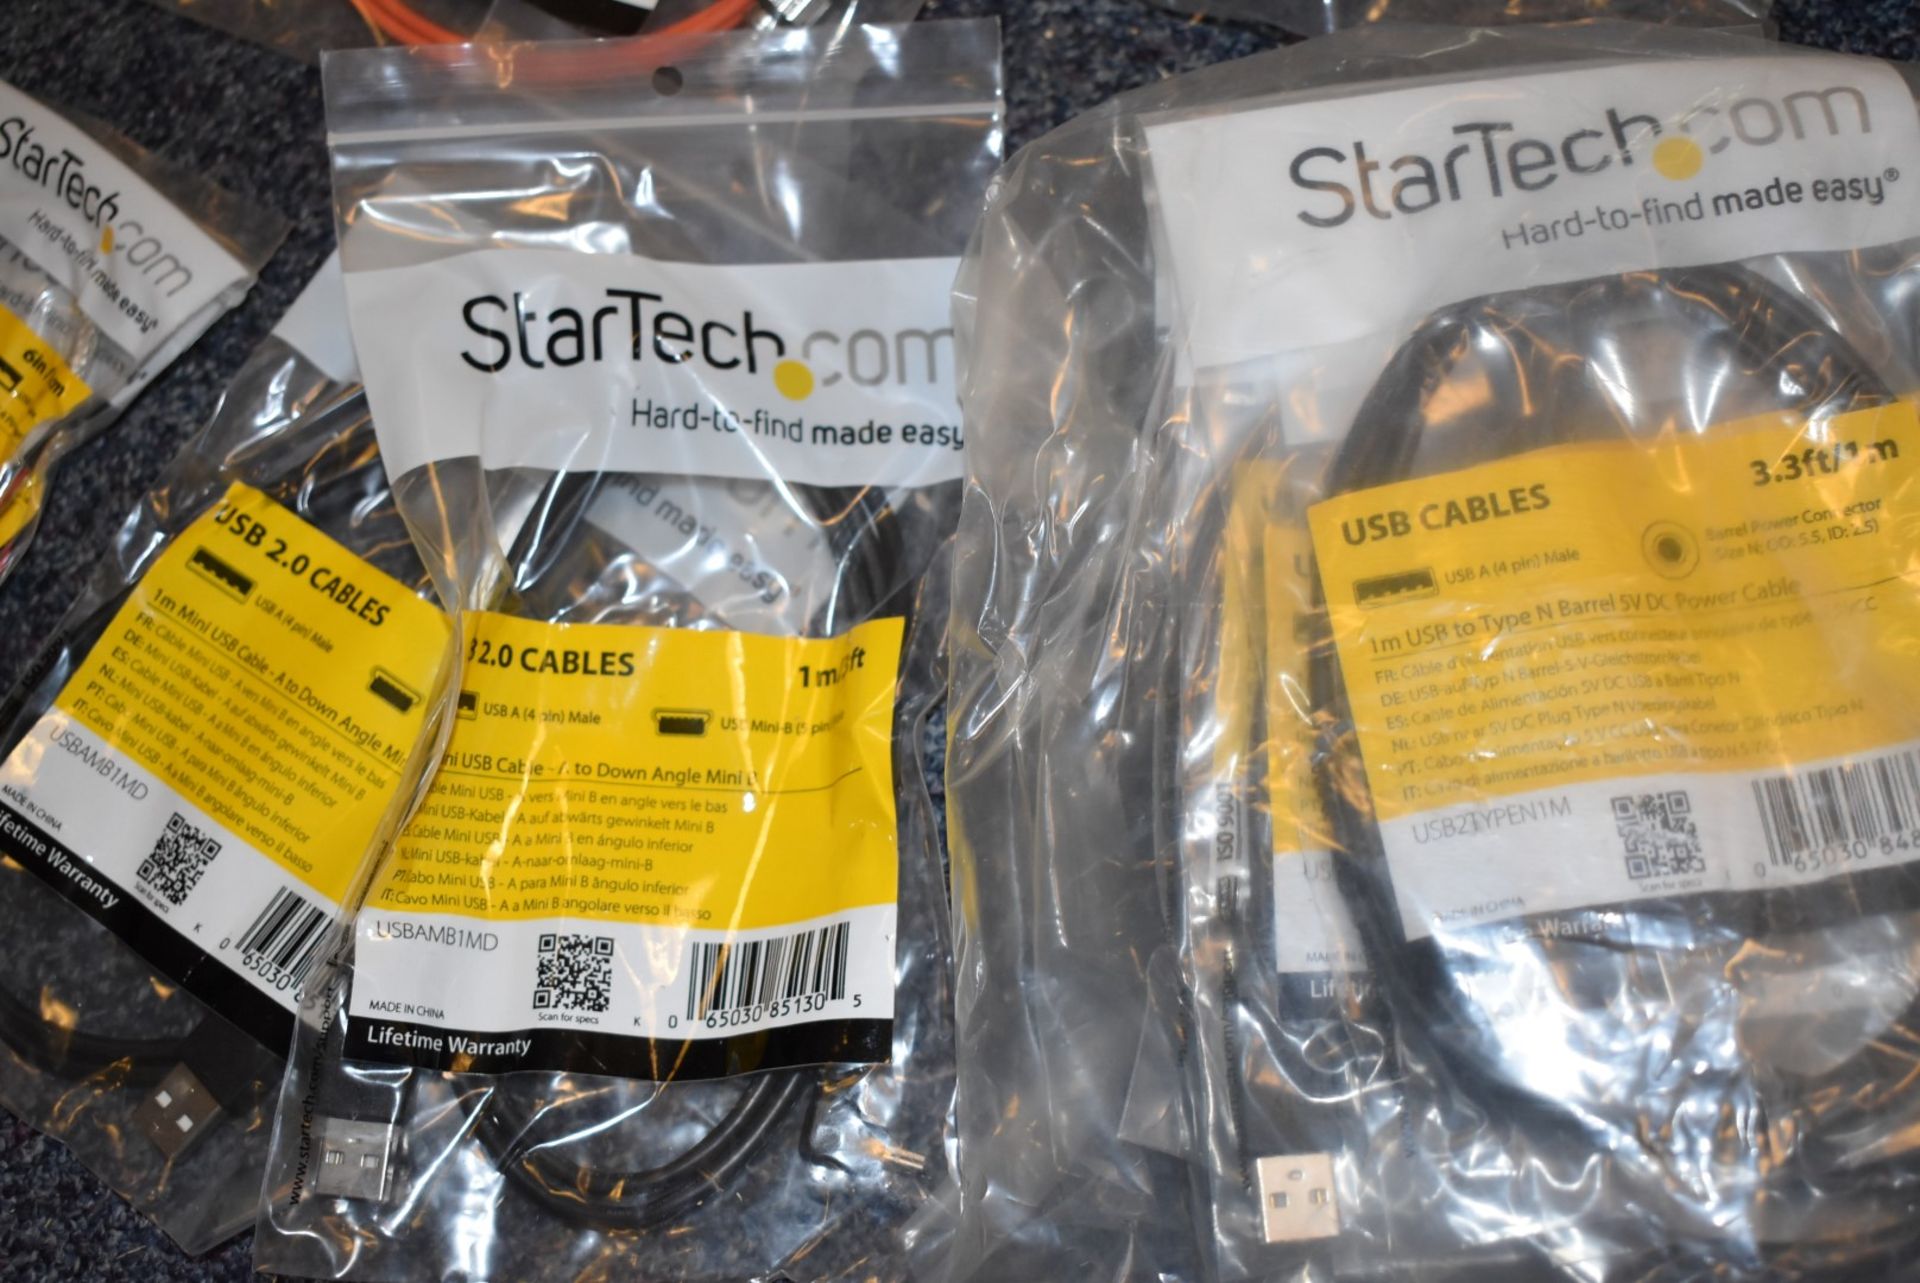 177 x Assorted StarTech Cables - Huge Lot in Original Packing - Various Cables Included - Image 22 of 50